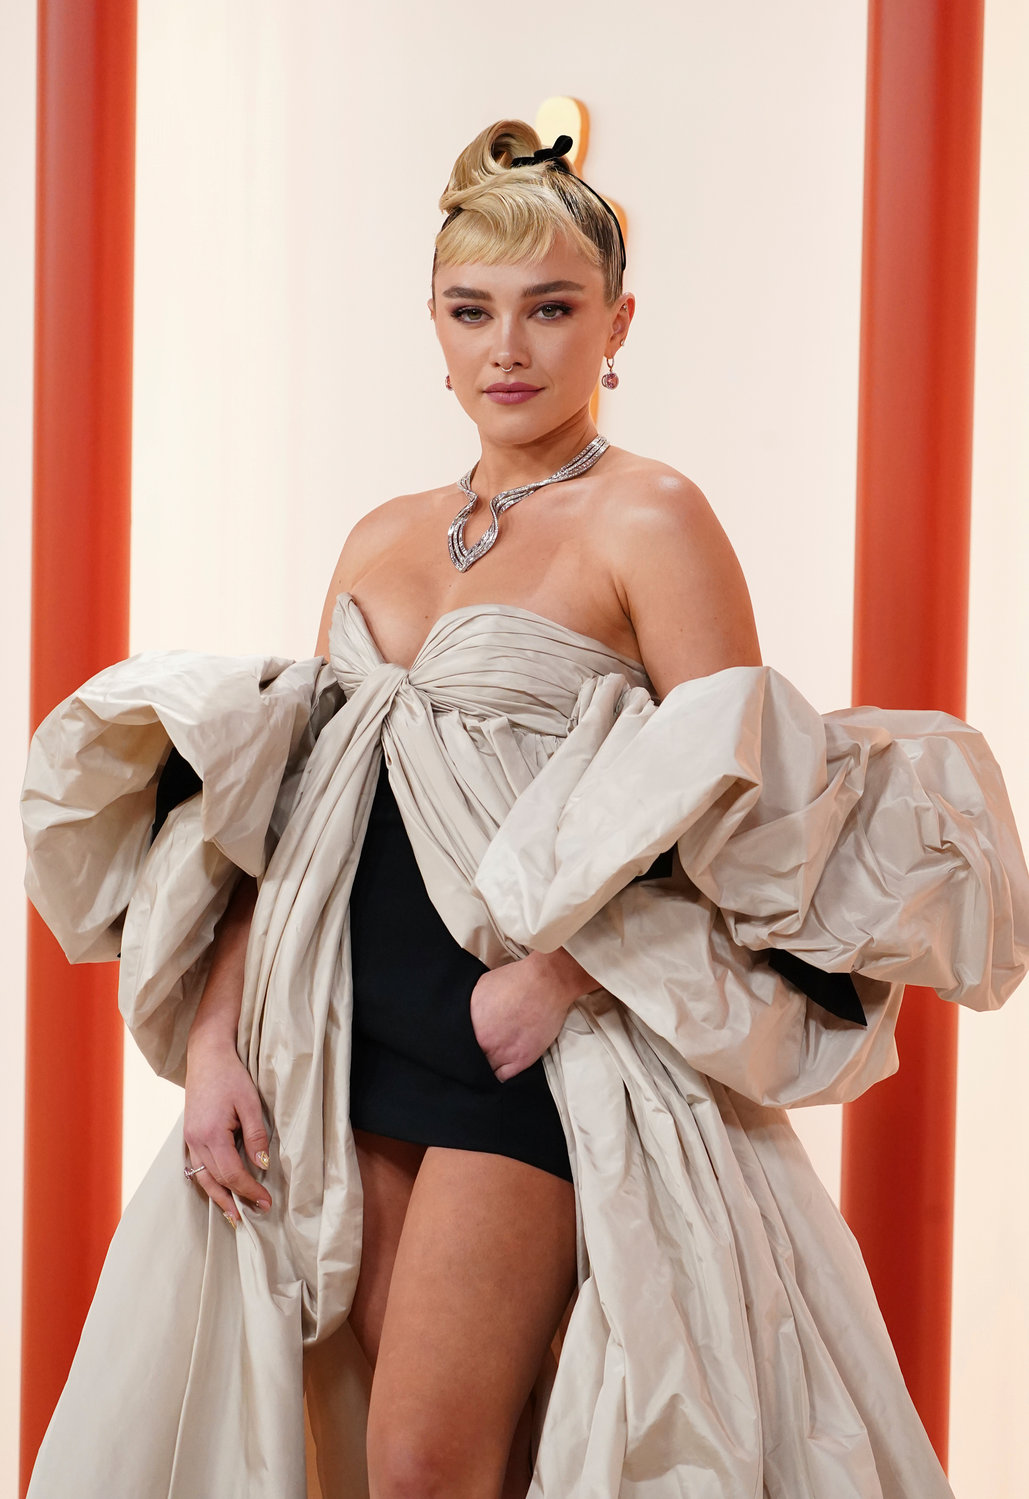 Florence Pugh arrives at the Oscars on Sunday, March 12, 2023, at the Dolby Theatre in Los Angeles. (Photo by Jordan Strauss/Invision/AP)